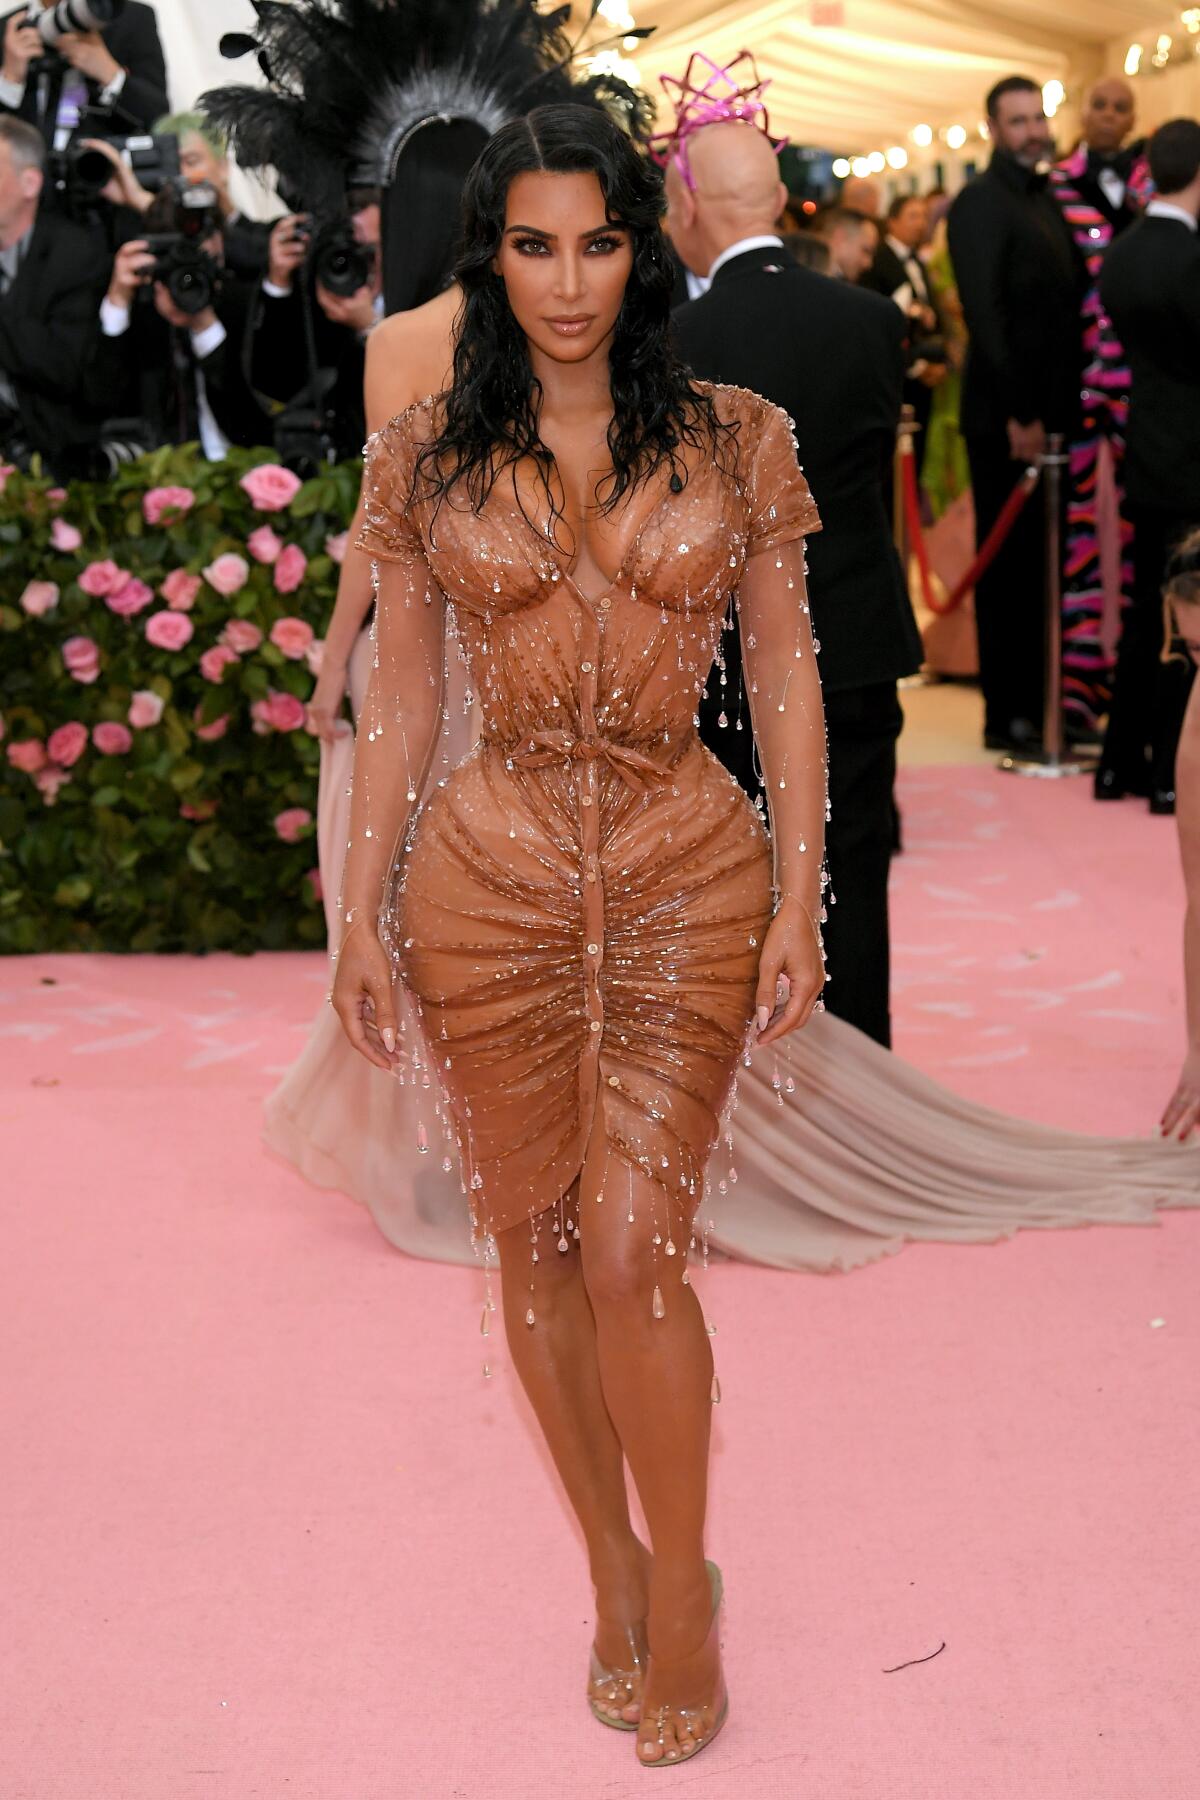 Kim Kardashian's Skims Waist Trainer Could Be Bad For Your Health